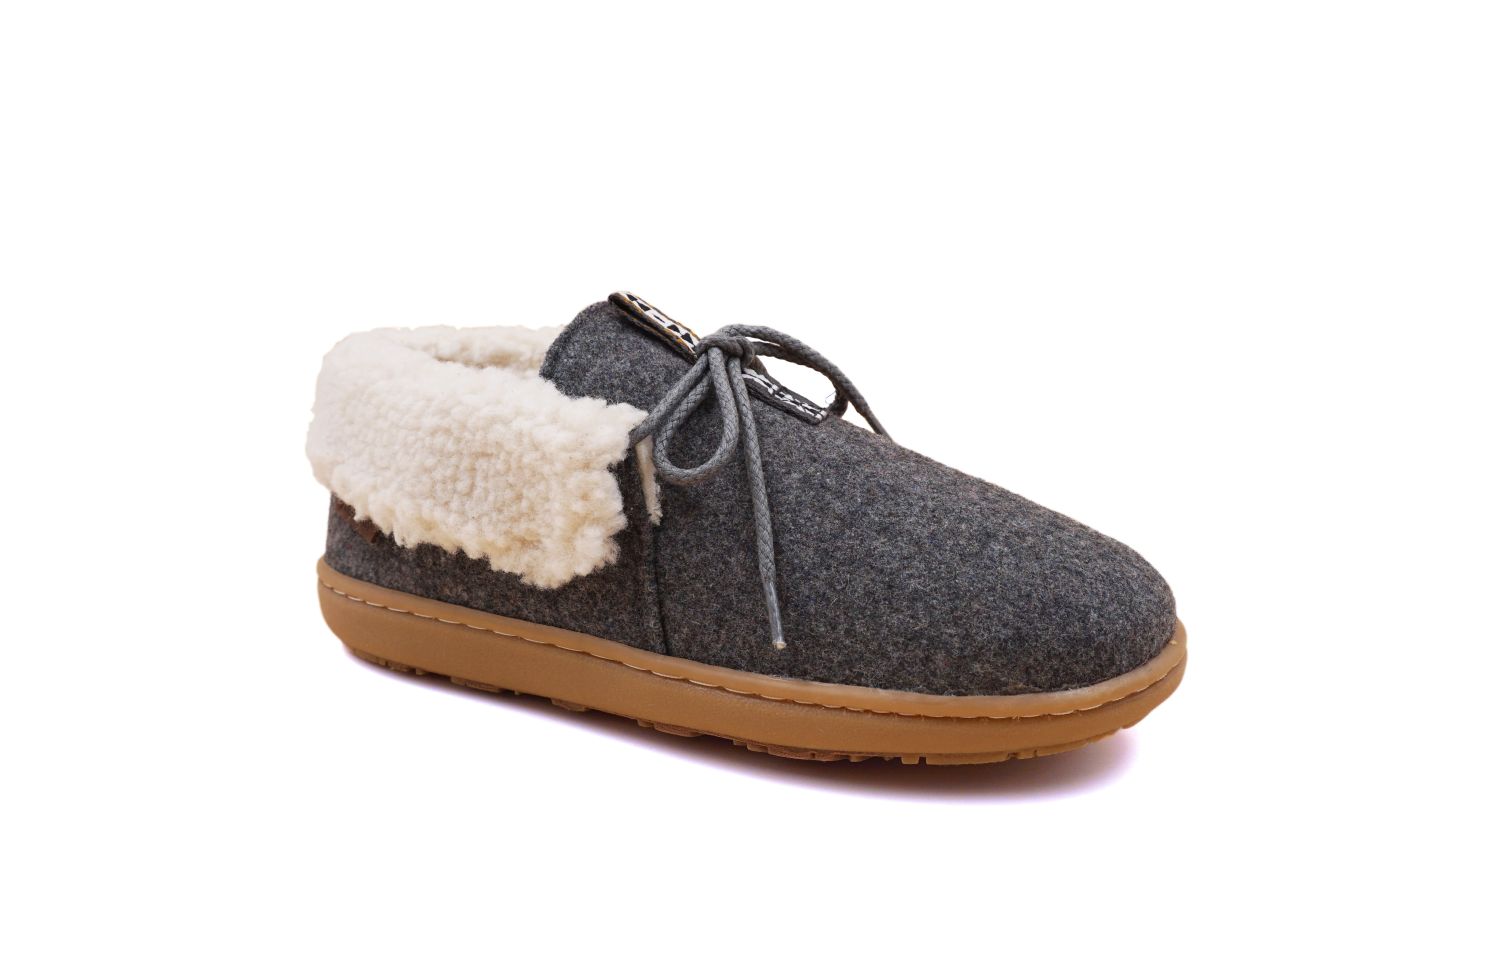 washable wool slippers